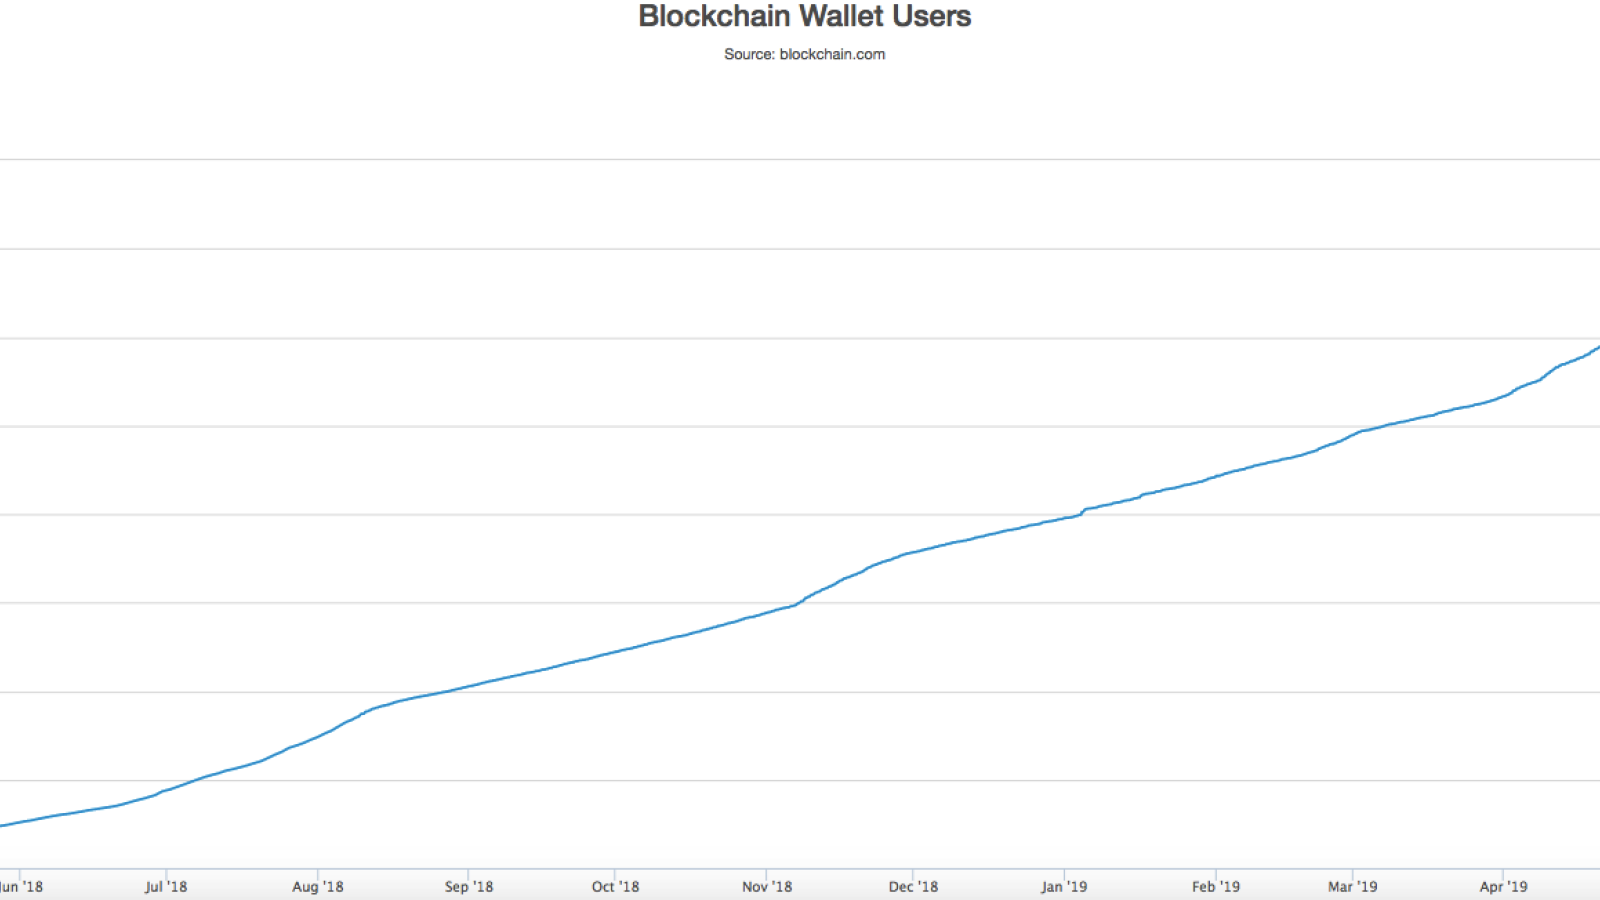 Number of installed Blockchain wallets by Blockchain.com